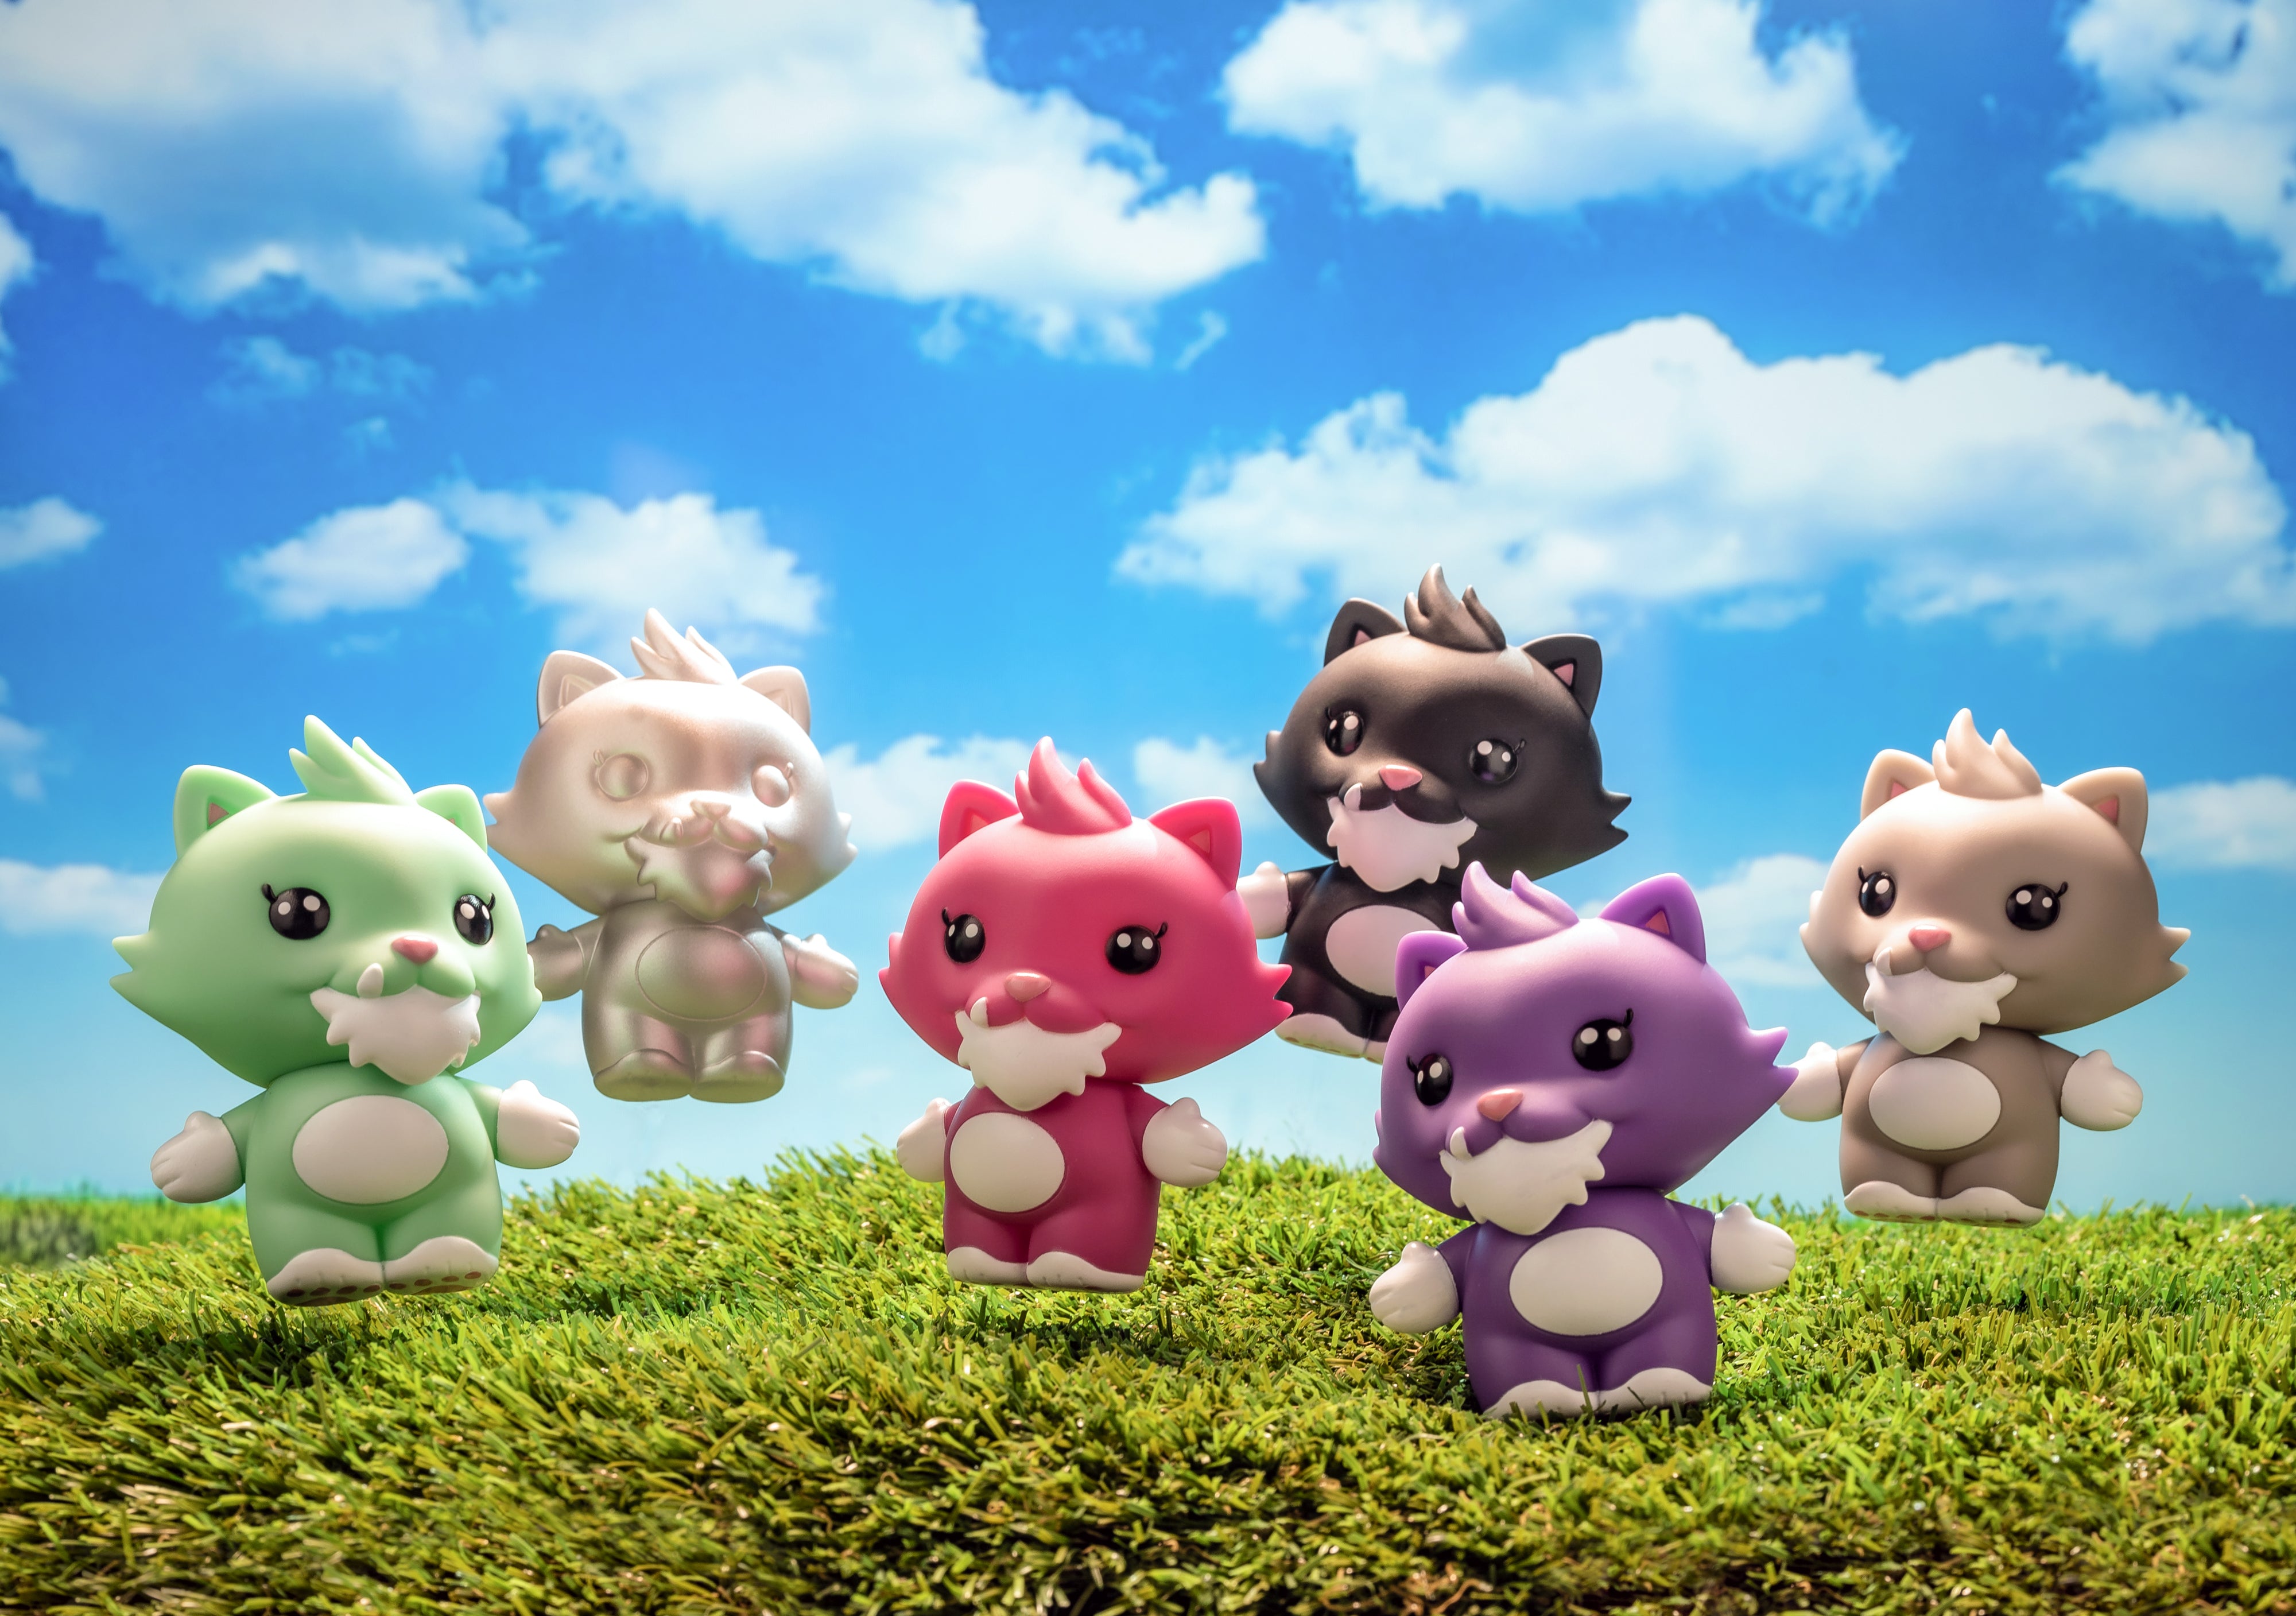 Toy cat with white beard, pink and purple toys, vinyl figures, designed by InPrimeWeTrust, limited edition of 100pcs.